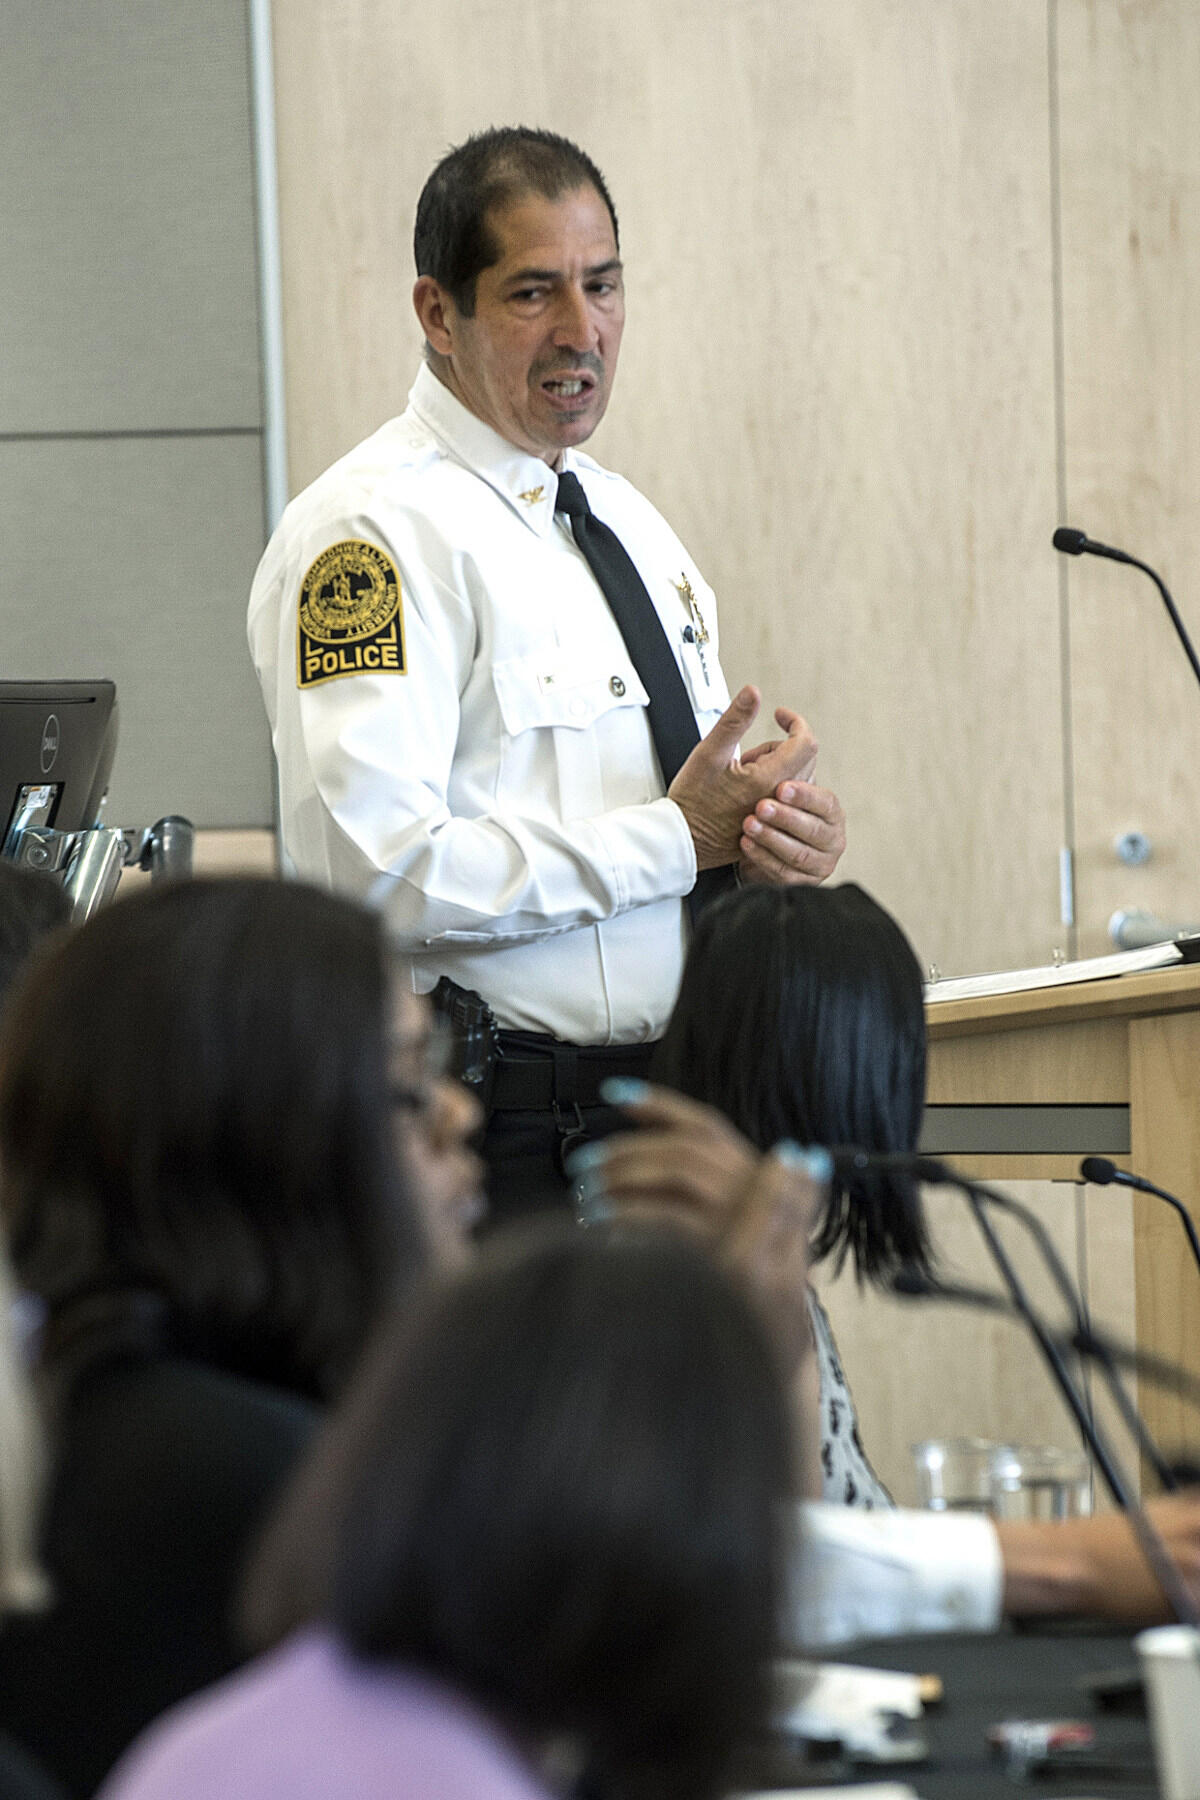 VCU Police Chief John Venuti provides opening remarks at the panel event. "I think this is a really important opportunity for all of us to think about how we are serving each other as colleagues and how we are serving our community," Venuti said. 